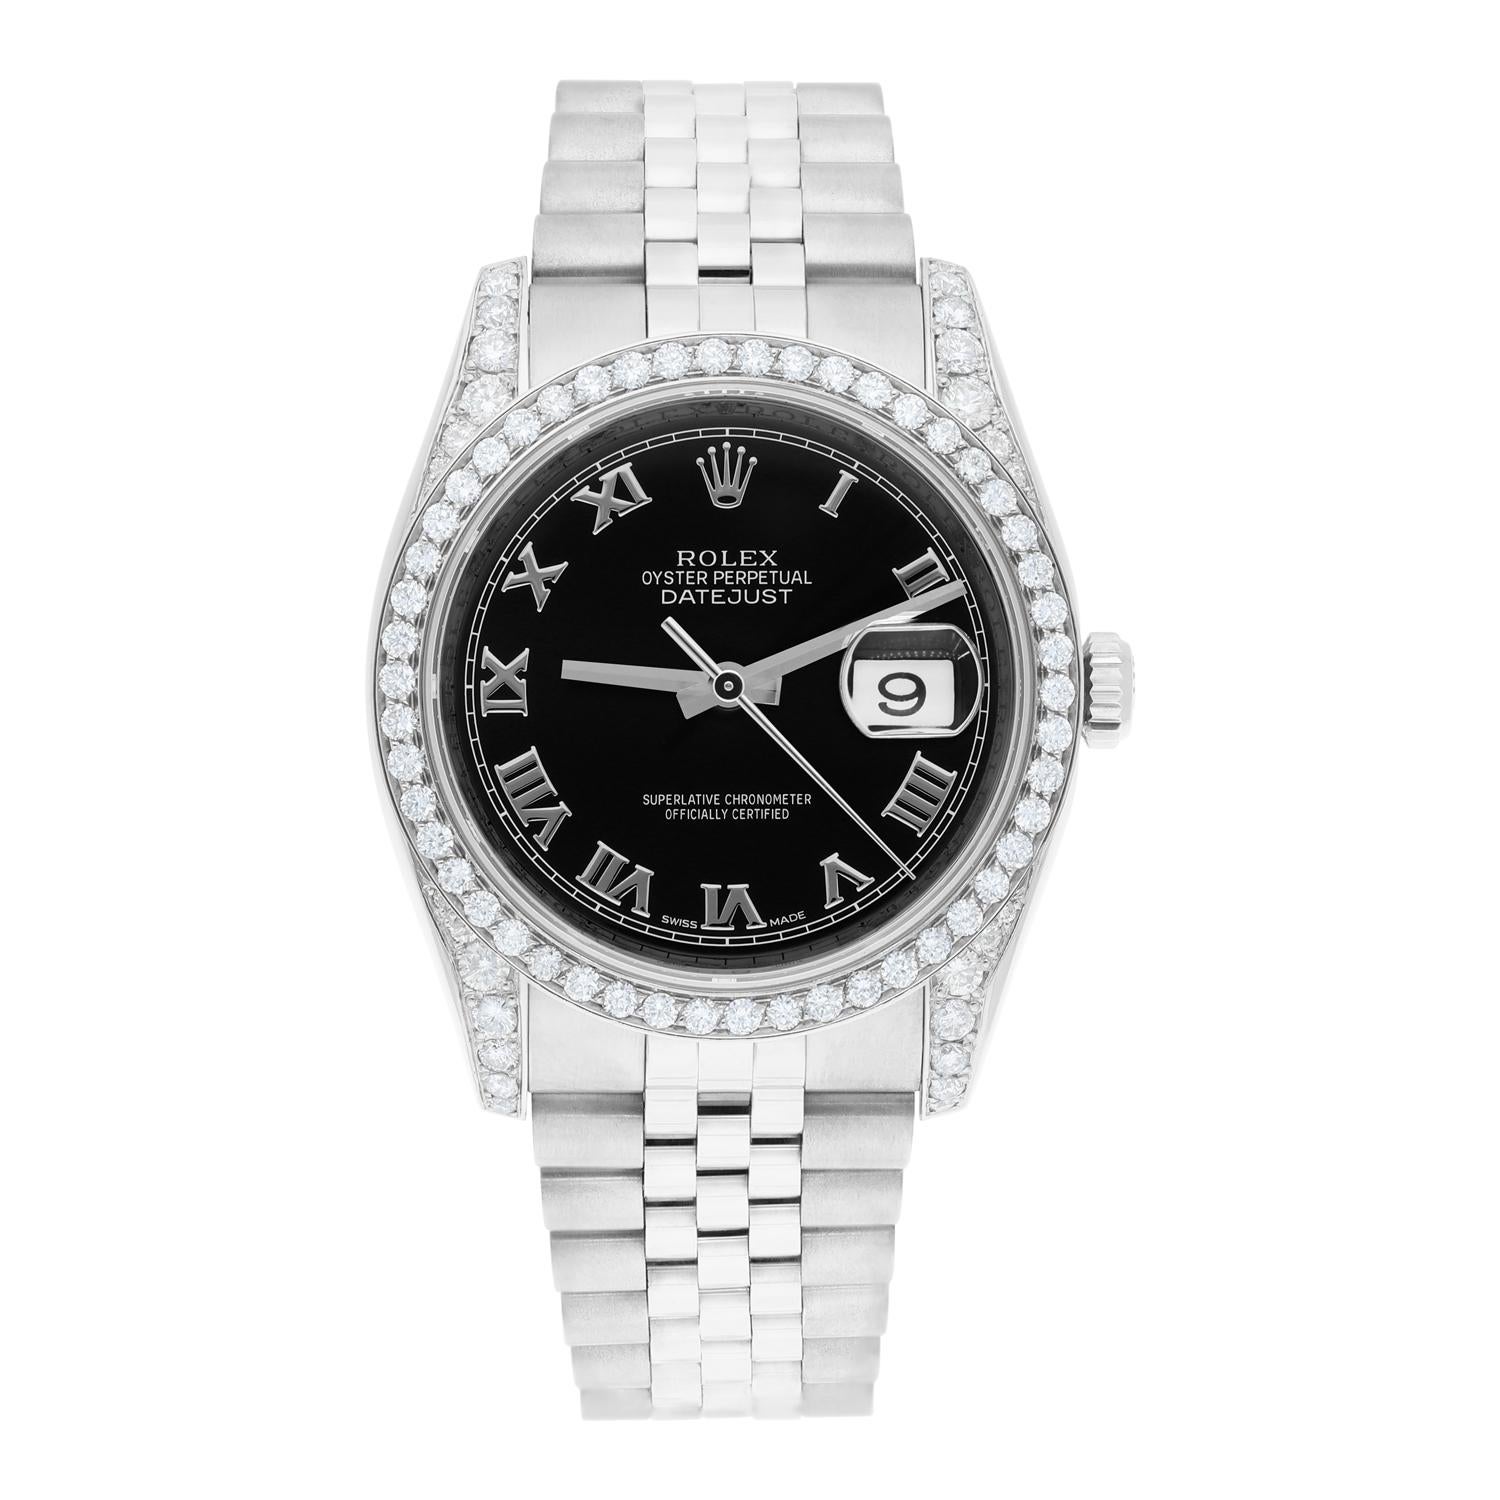 Brand: Rolex
Series: Datejust 
Model: 116234
Case Diameter: 36 mm
Bracelet: Jubilee band; stainless steel
Bezel. and Lugs: Custom Diamond Set
Dial: Black Roman
Carat Weight: 2.30 carats in total diamond weight
The sale includes a Rolex box and an